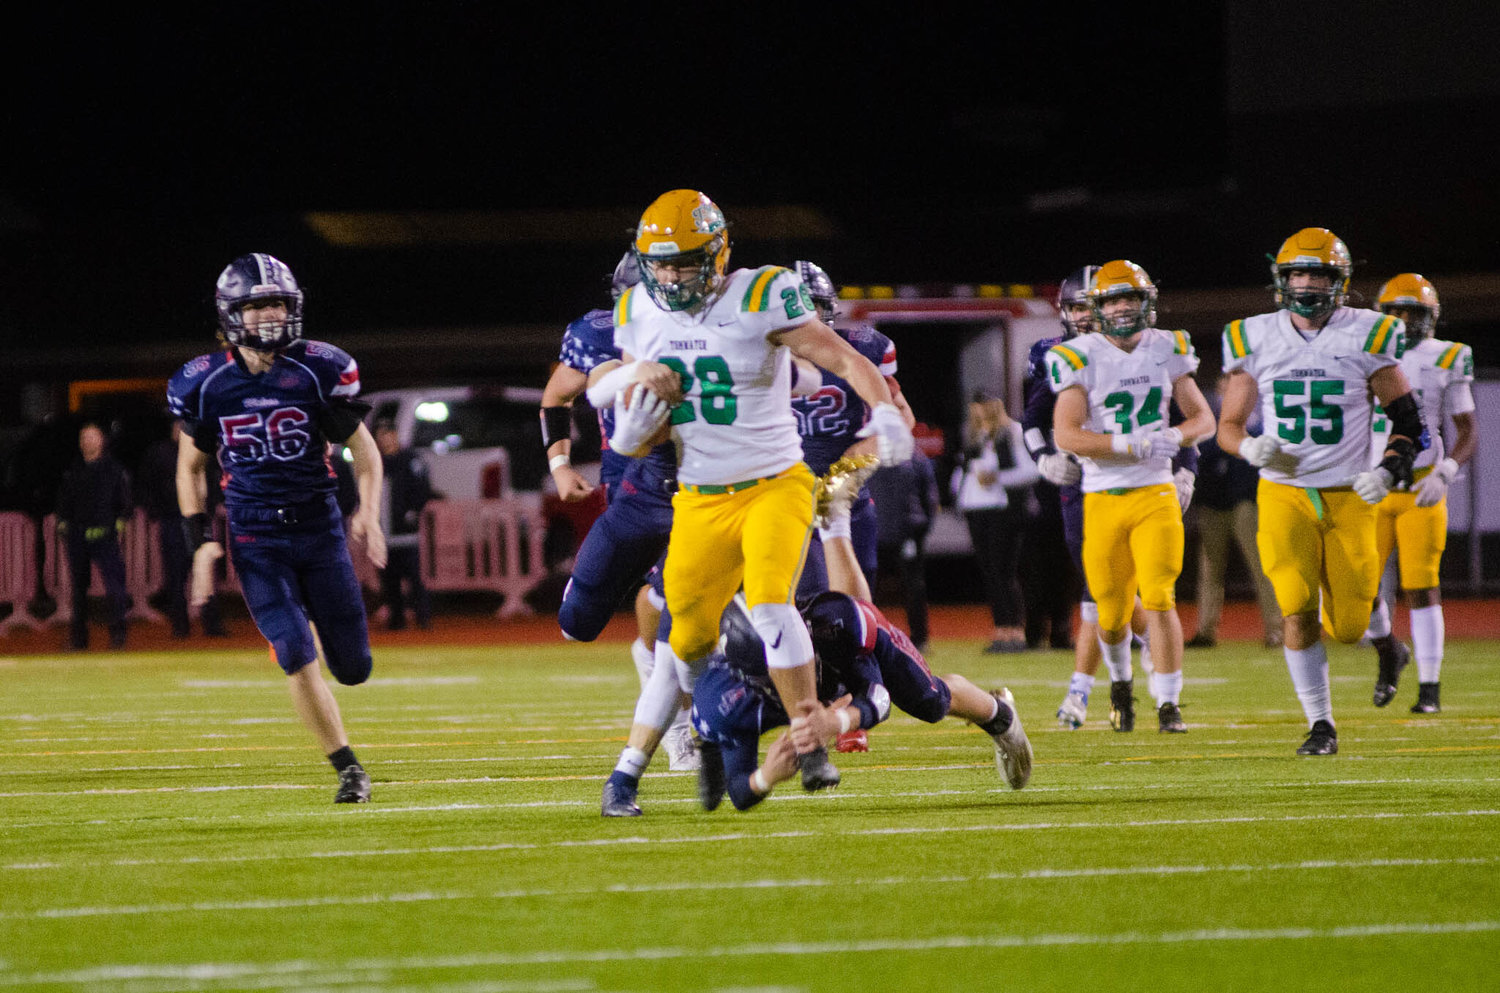 Tumwater’s Ryan Orr rushes the ball forward as Black Hills lineman attempt to stop him. The Thunderbirds shellacked the Wolves to win the Pioneer Bowl 50-7 Friday night.